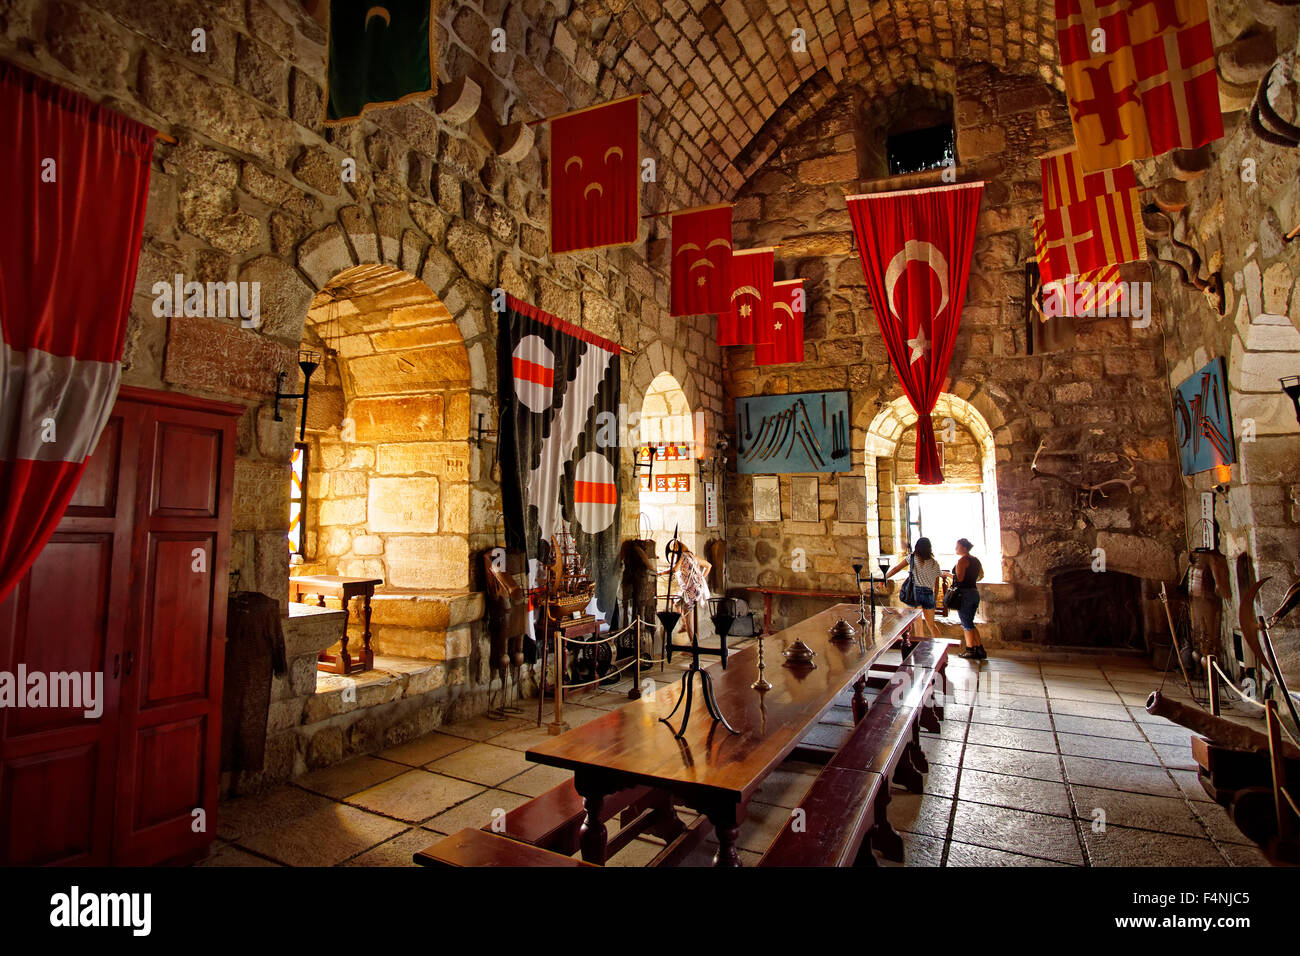 Interior of the English Tower at the castle of St. Peter's, Bodrum, Mugla, Turkey. The tower was home to the English crusaders. Stock Photo